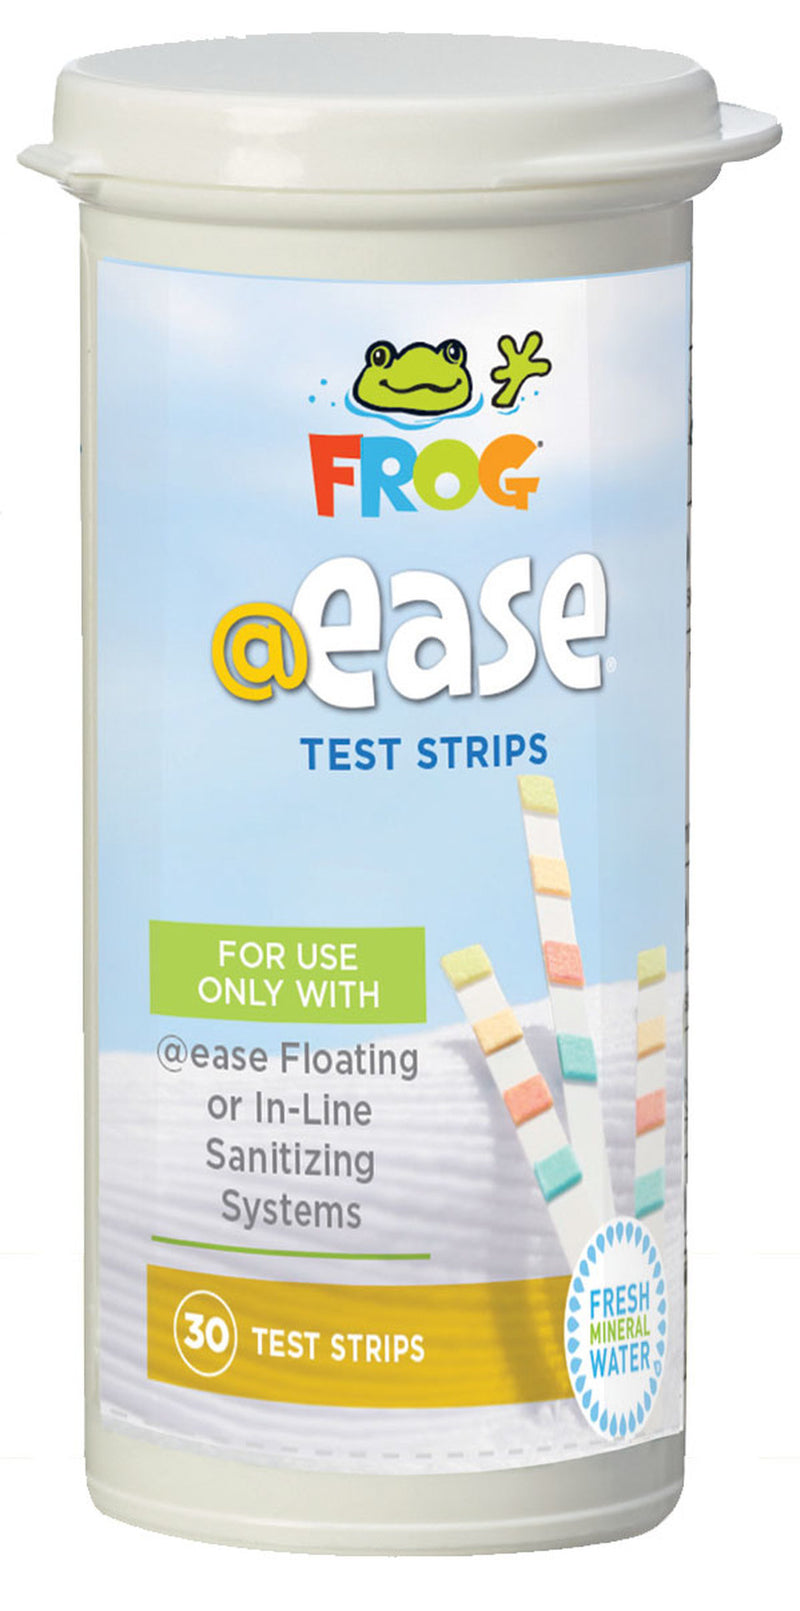 Frog @Ease Test Strips 30ct